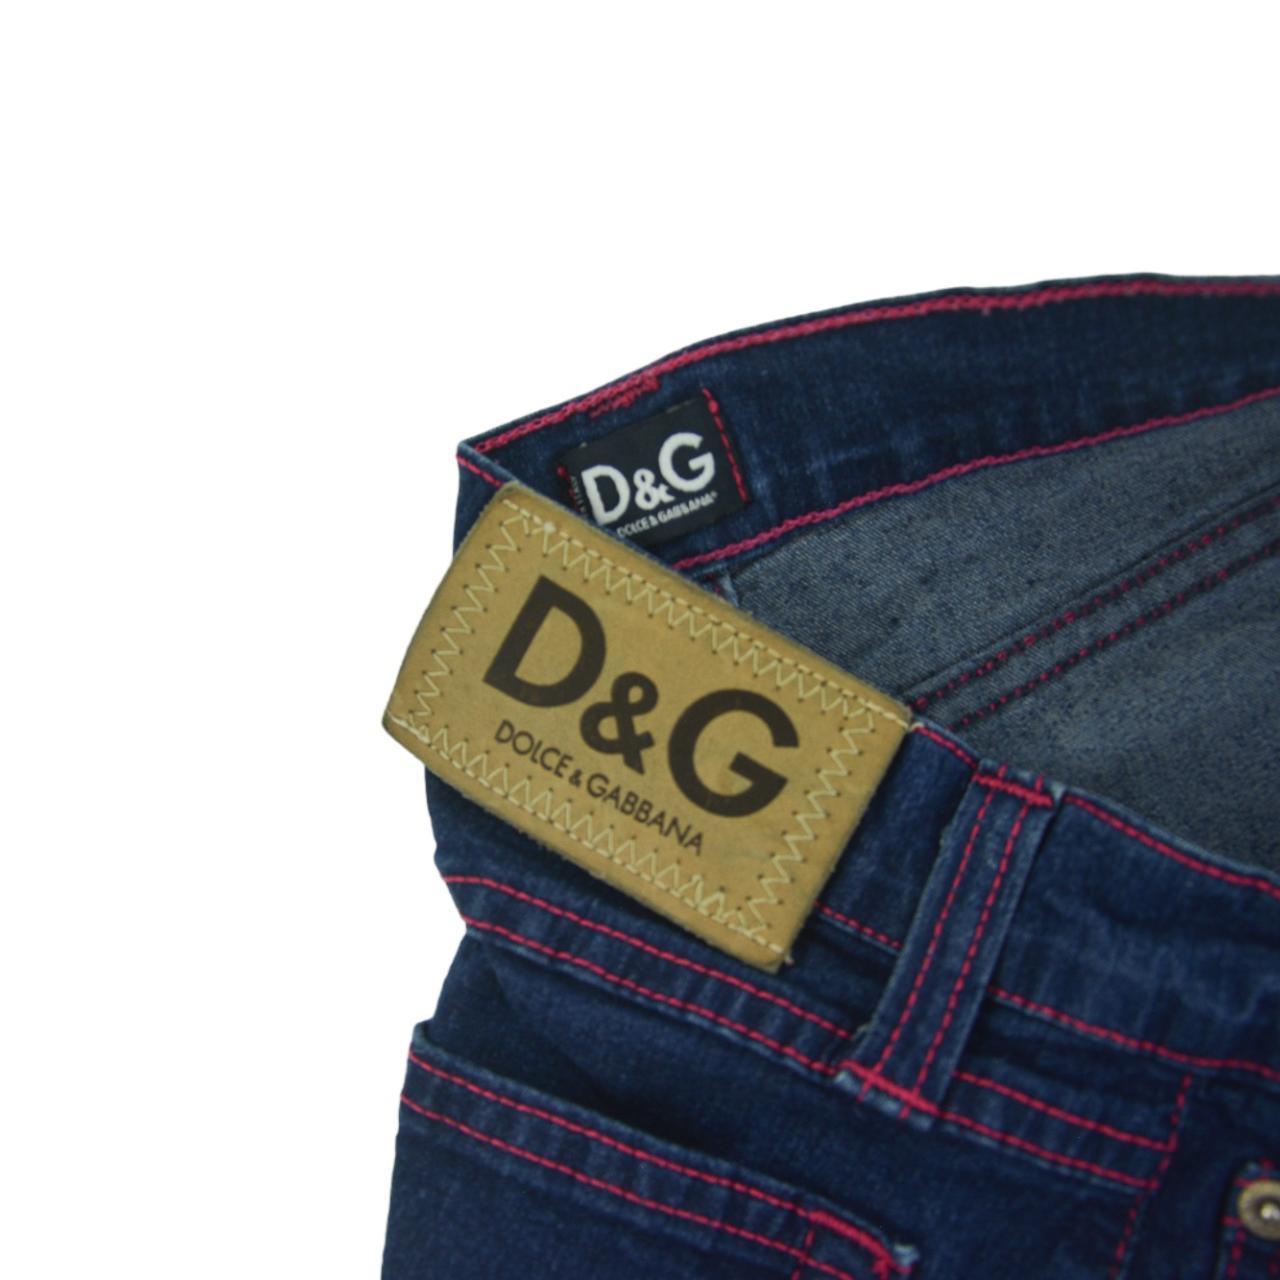 Vintage Dolce and Gabbana Contrast Stitching Jeans Size Women's W25 - Known Source